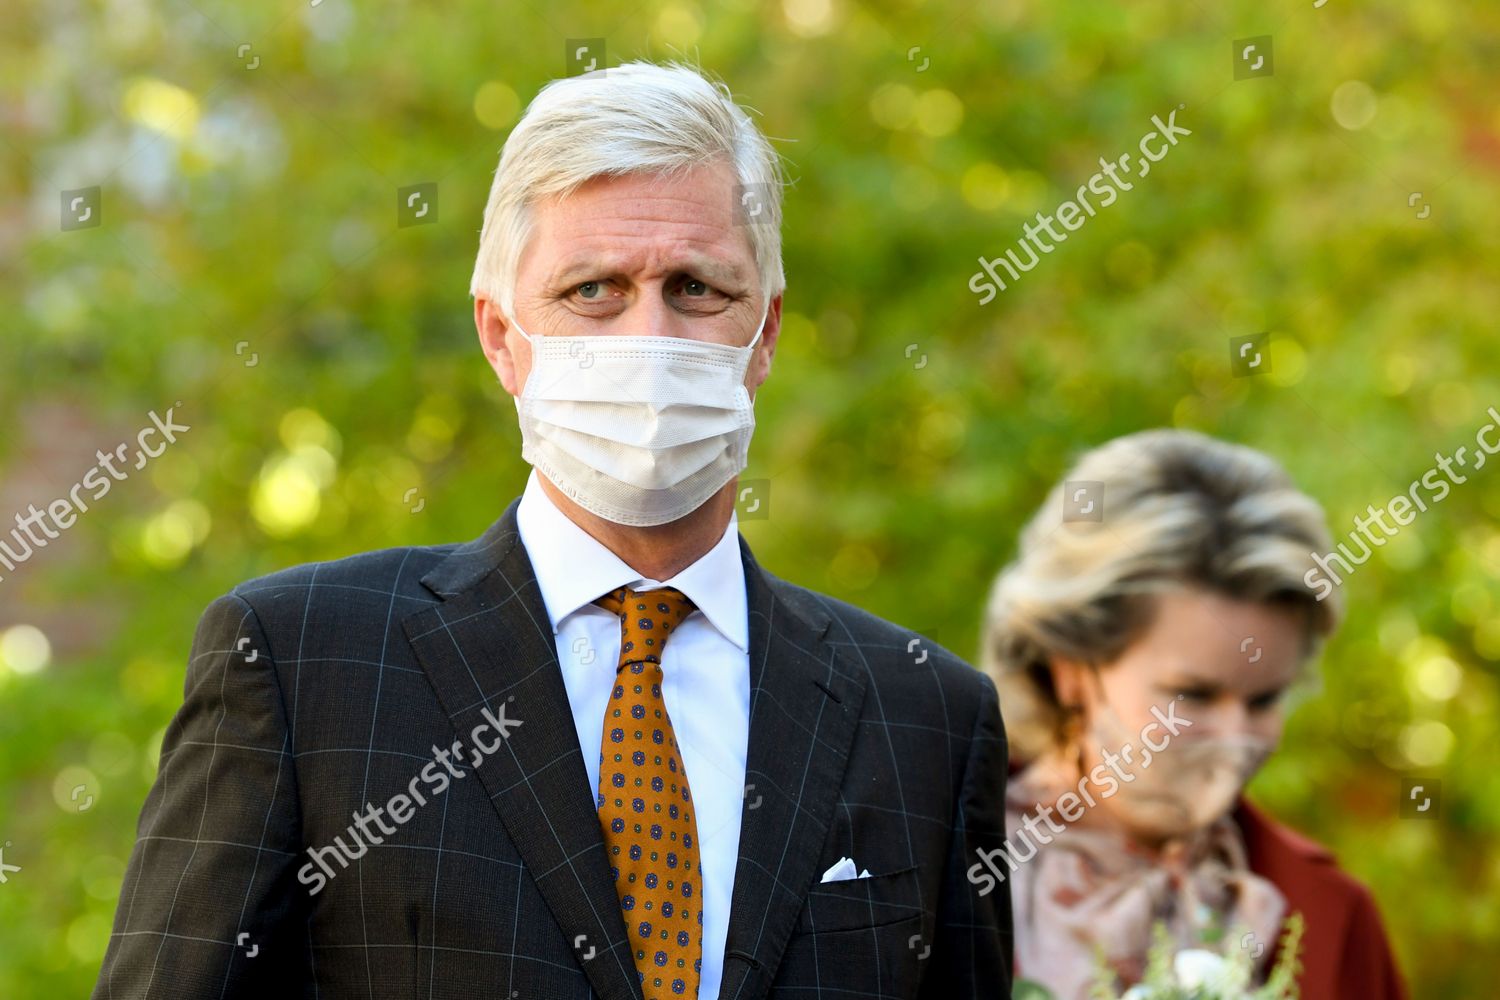 queen-mathilde-and-king-philippe-visit-the-province-of-luxembourg-vielsalm-belgium-shutterstock-editorial-12529850bj.jpg